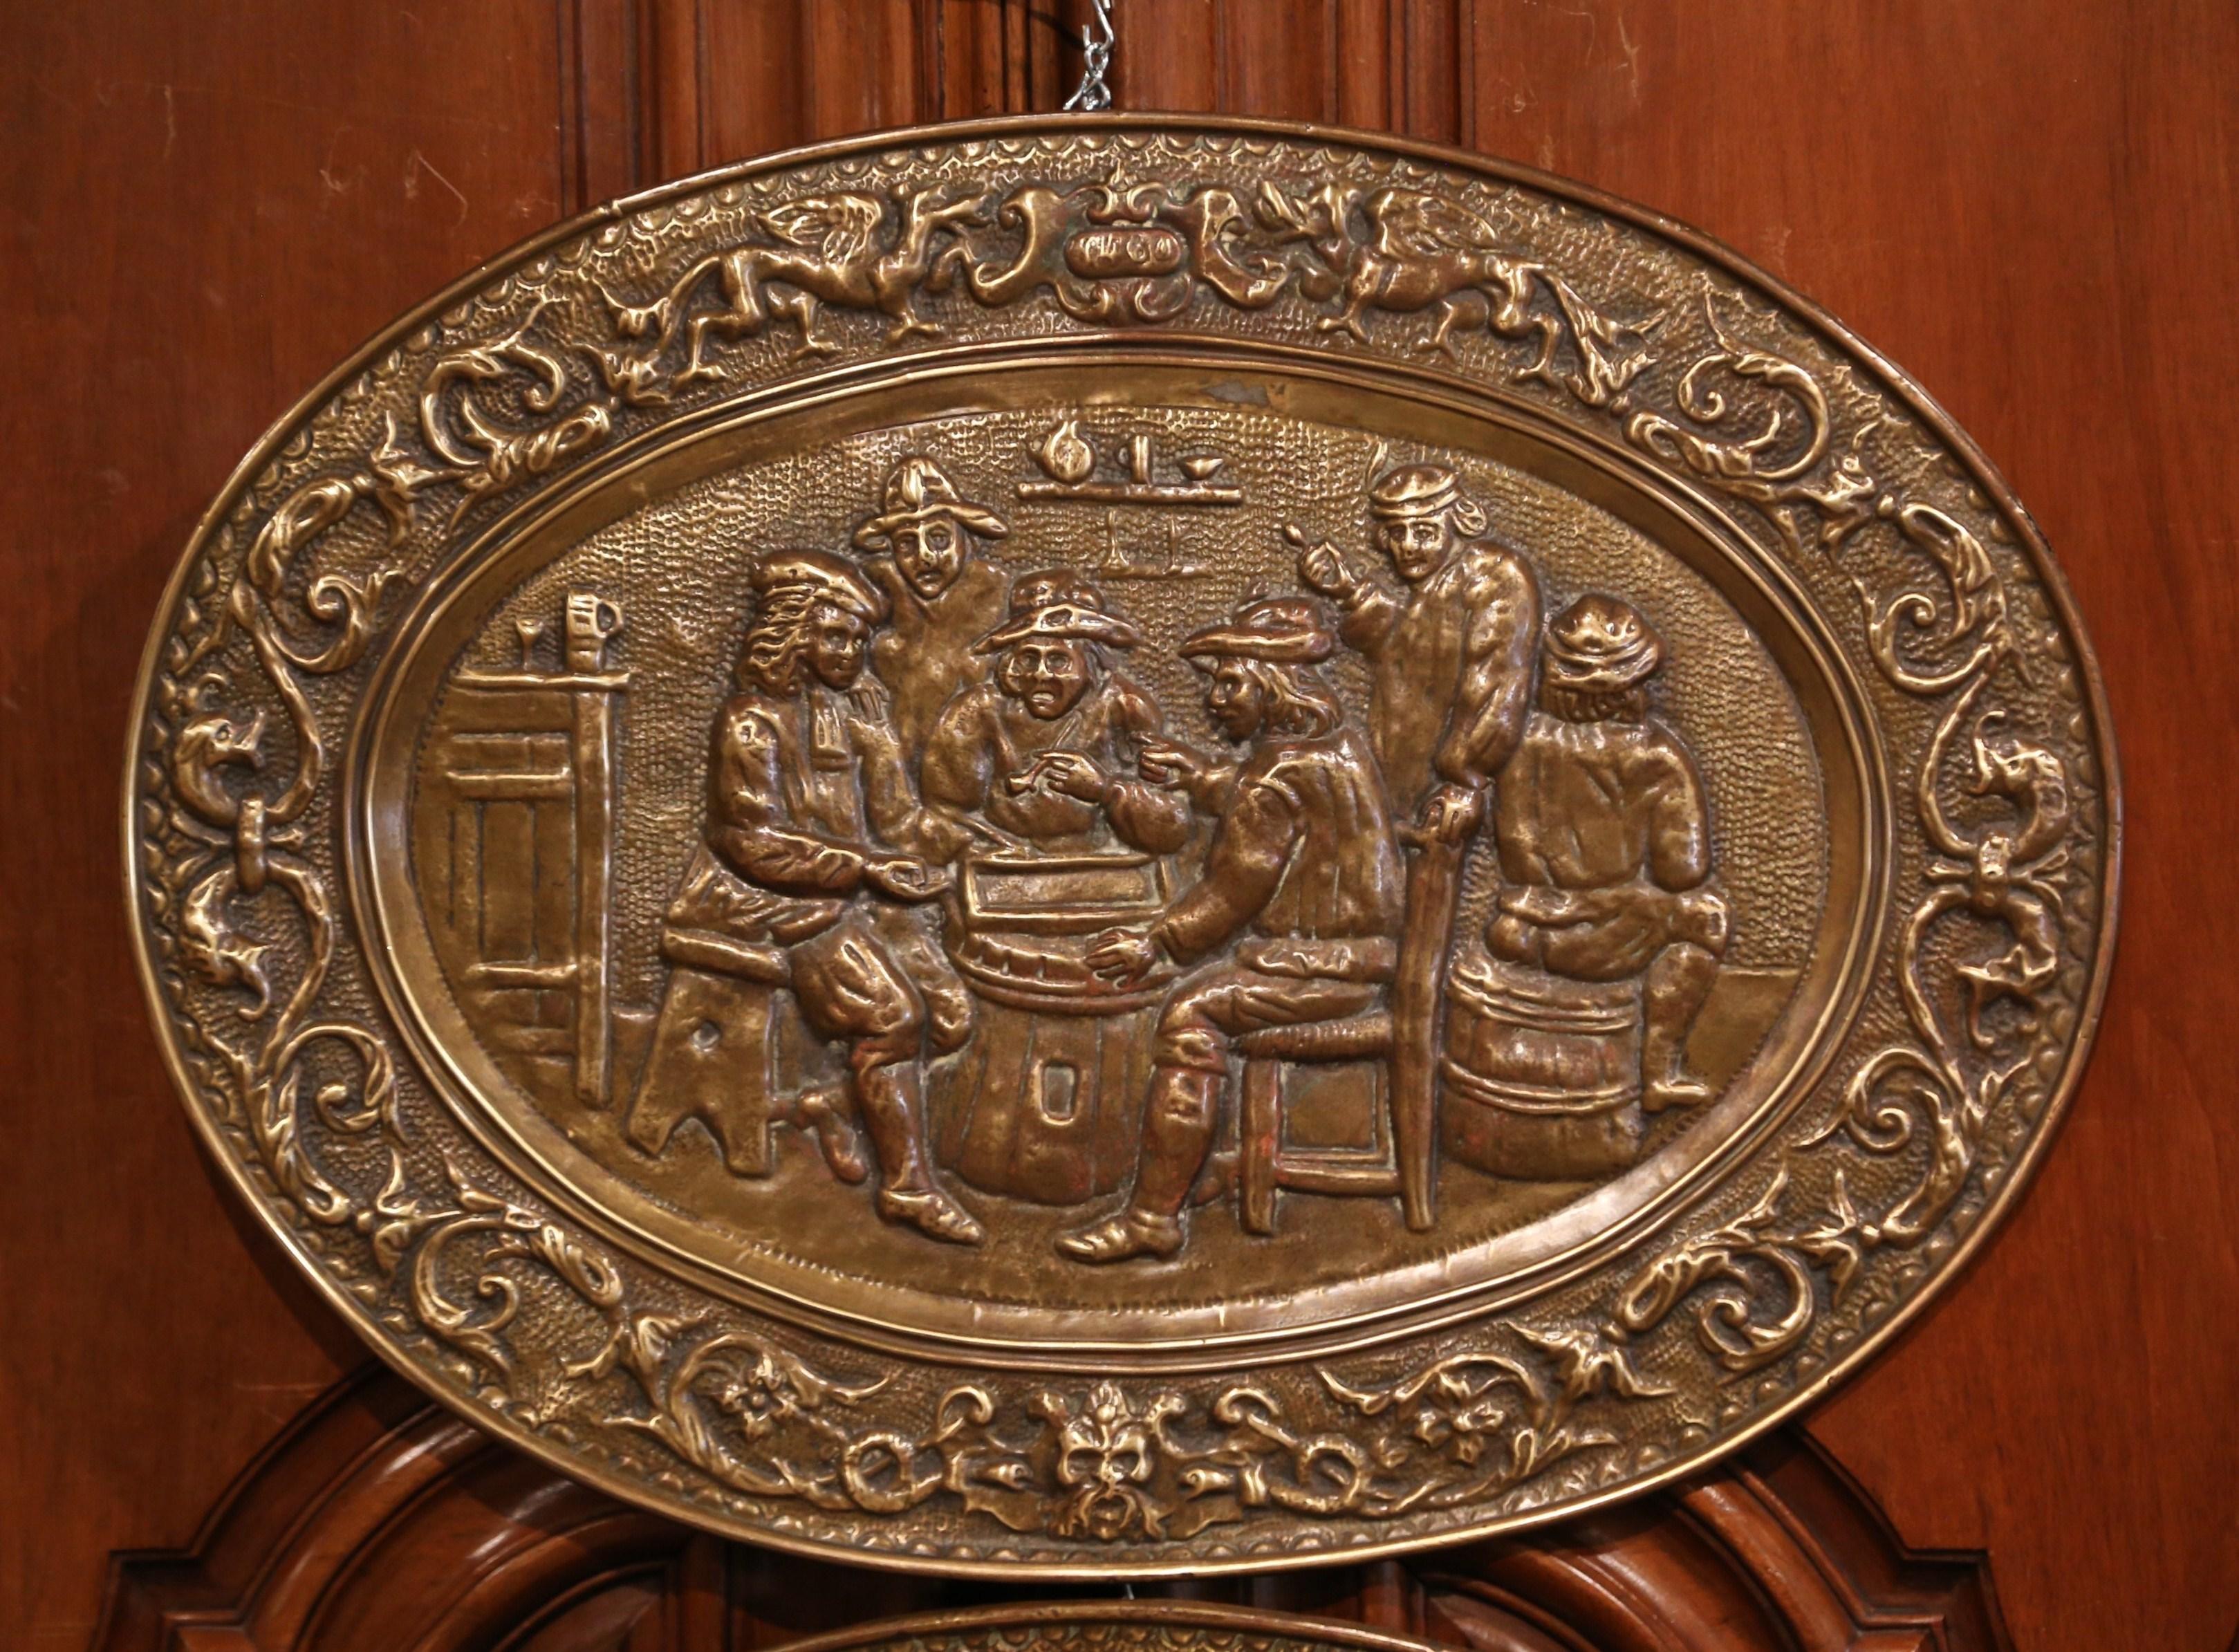 These antique plaques were created in France, circa 1880. Oval in shape and made of repousse copper, each plaque depicts a cabaret scene in the manner of David Teniers with people drinking and playing cards. The wall decorations are in excellent